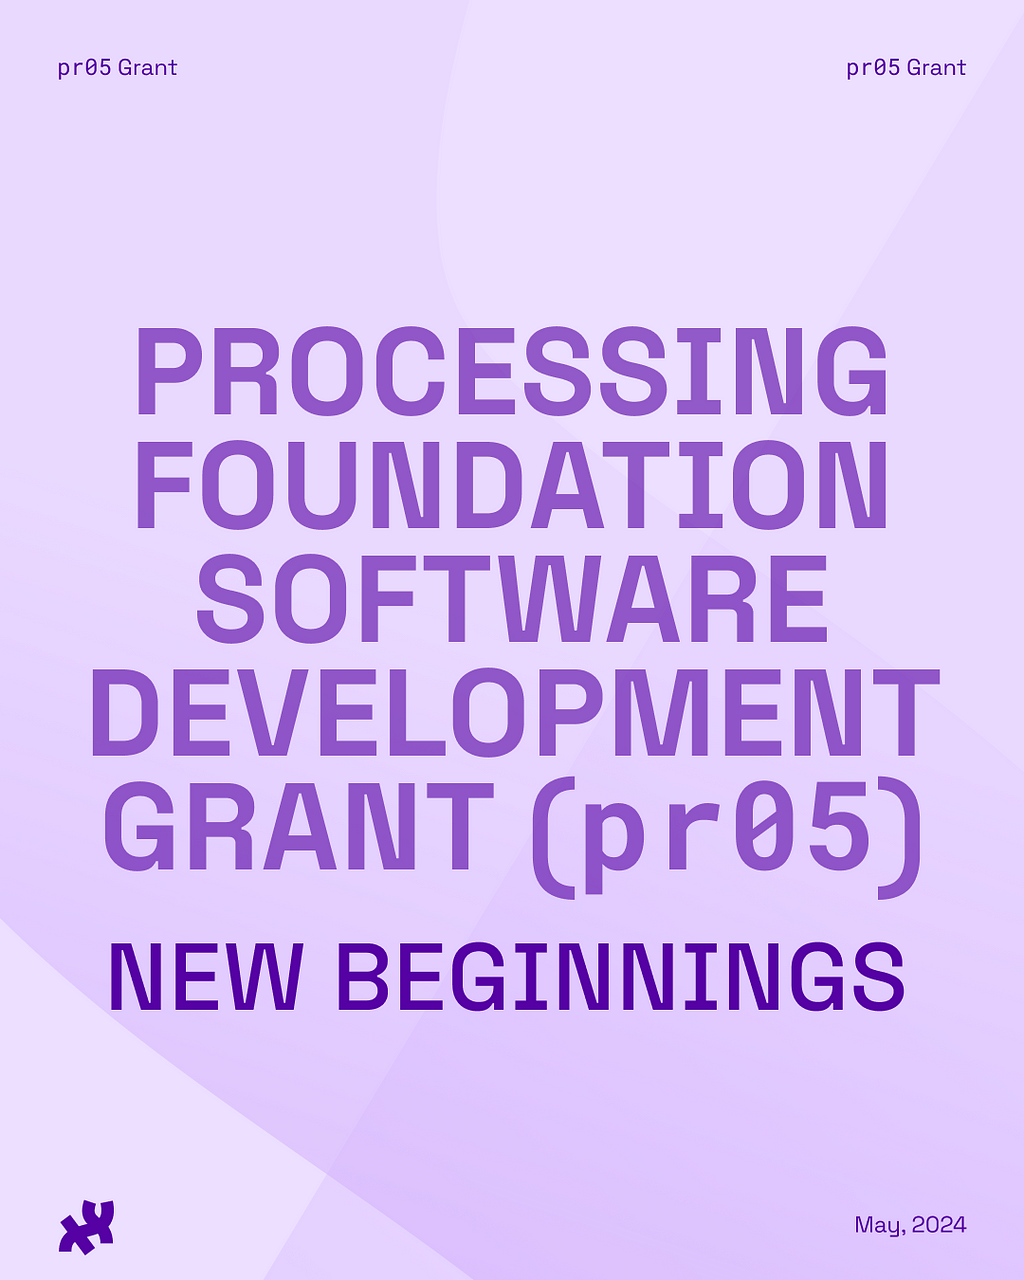 A lavender and white graphic with the title, ‘Processing foundation software development grant (pr05)’ with subtitle, ‘new beginnings’. The header reads ‘pr05 Grant’ and footer ‘May, 2024’ with the Processing Foundation logo.